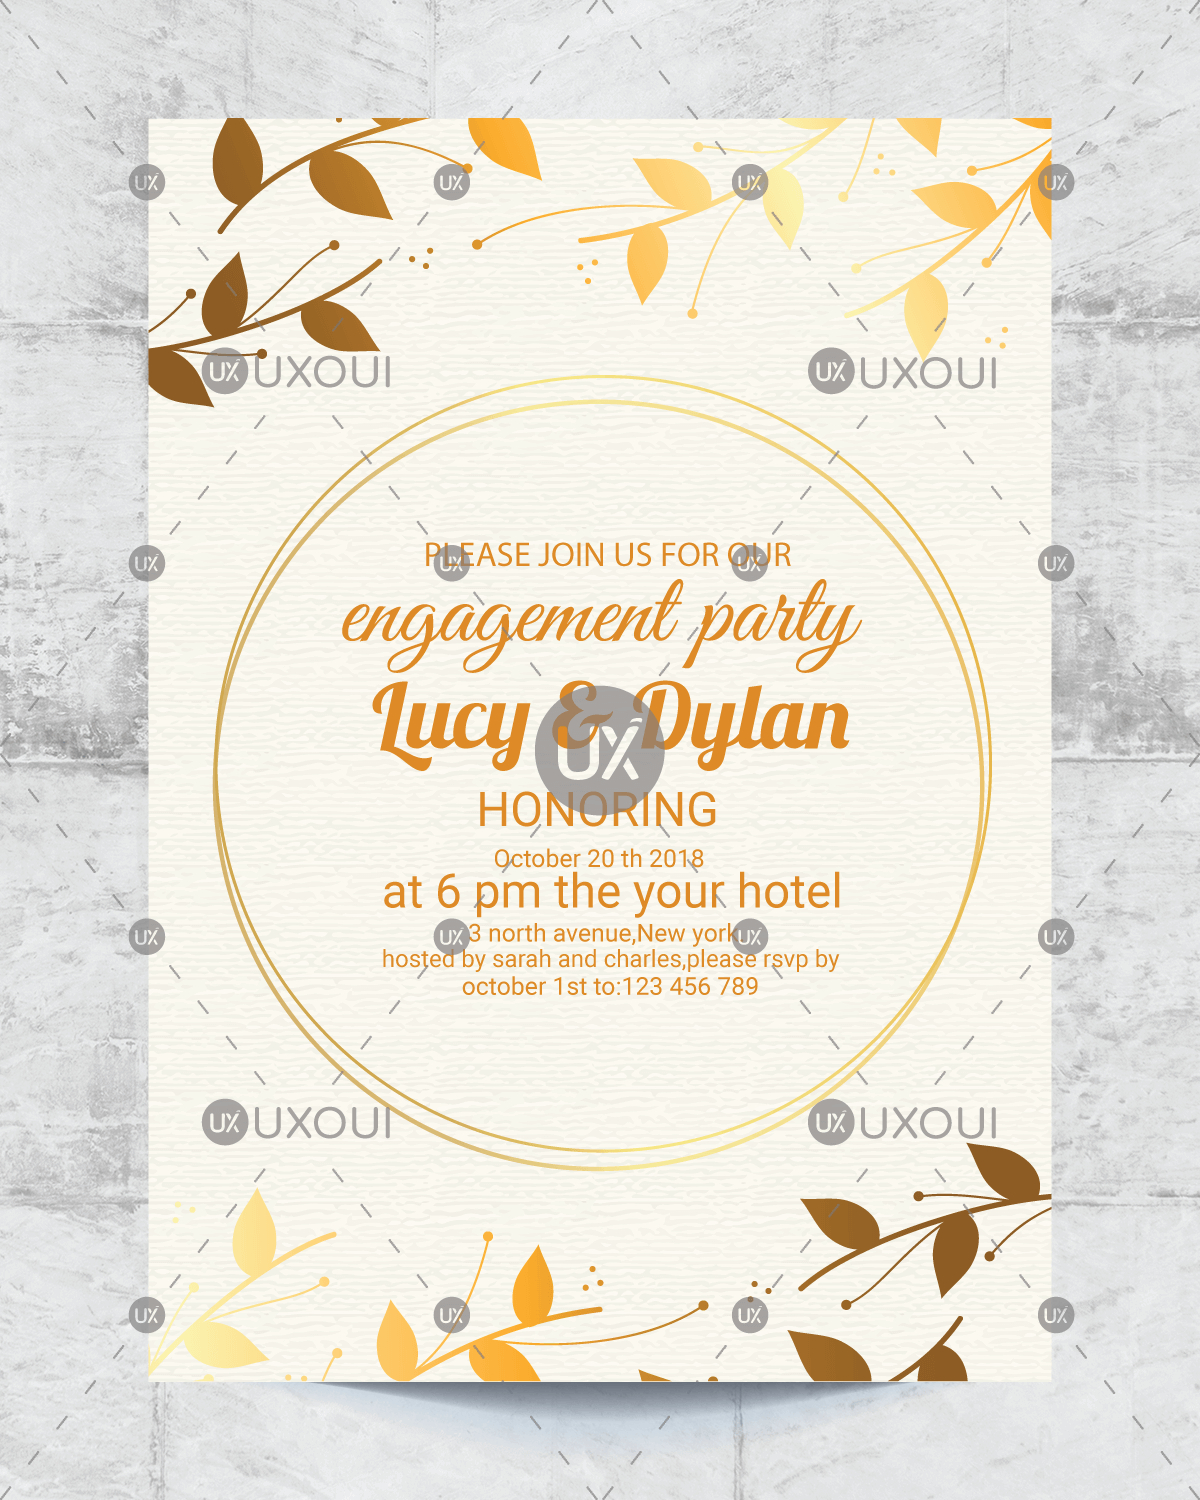 Floral Wedding Engagement Party Invitation Card Design Template Vector Inside Engagement Invitation Card Template